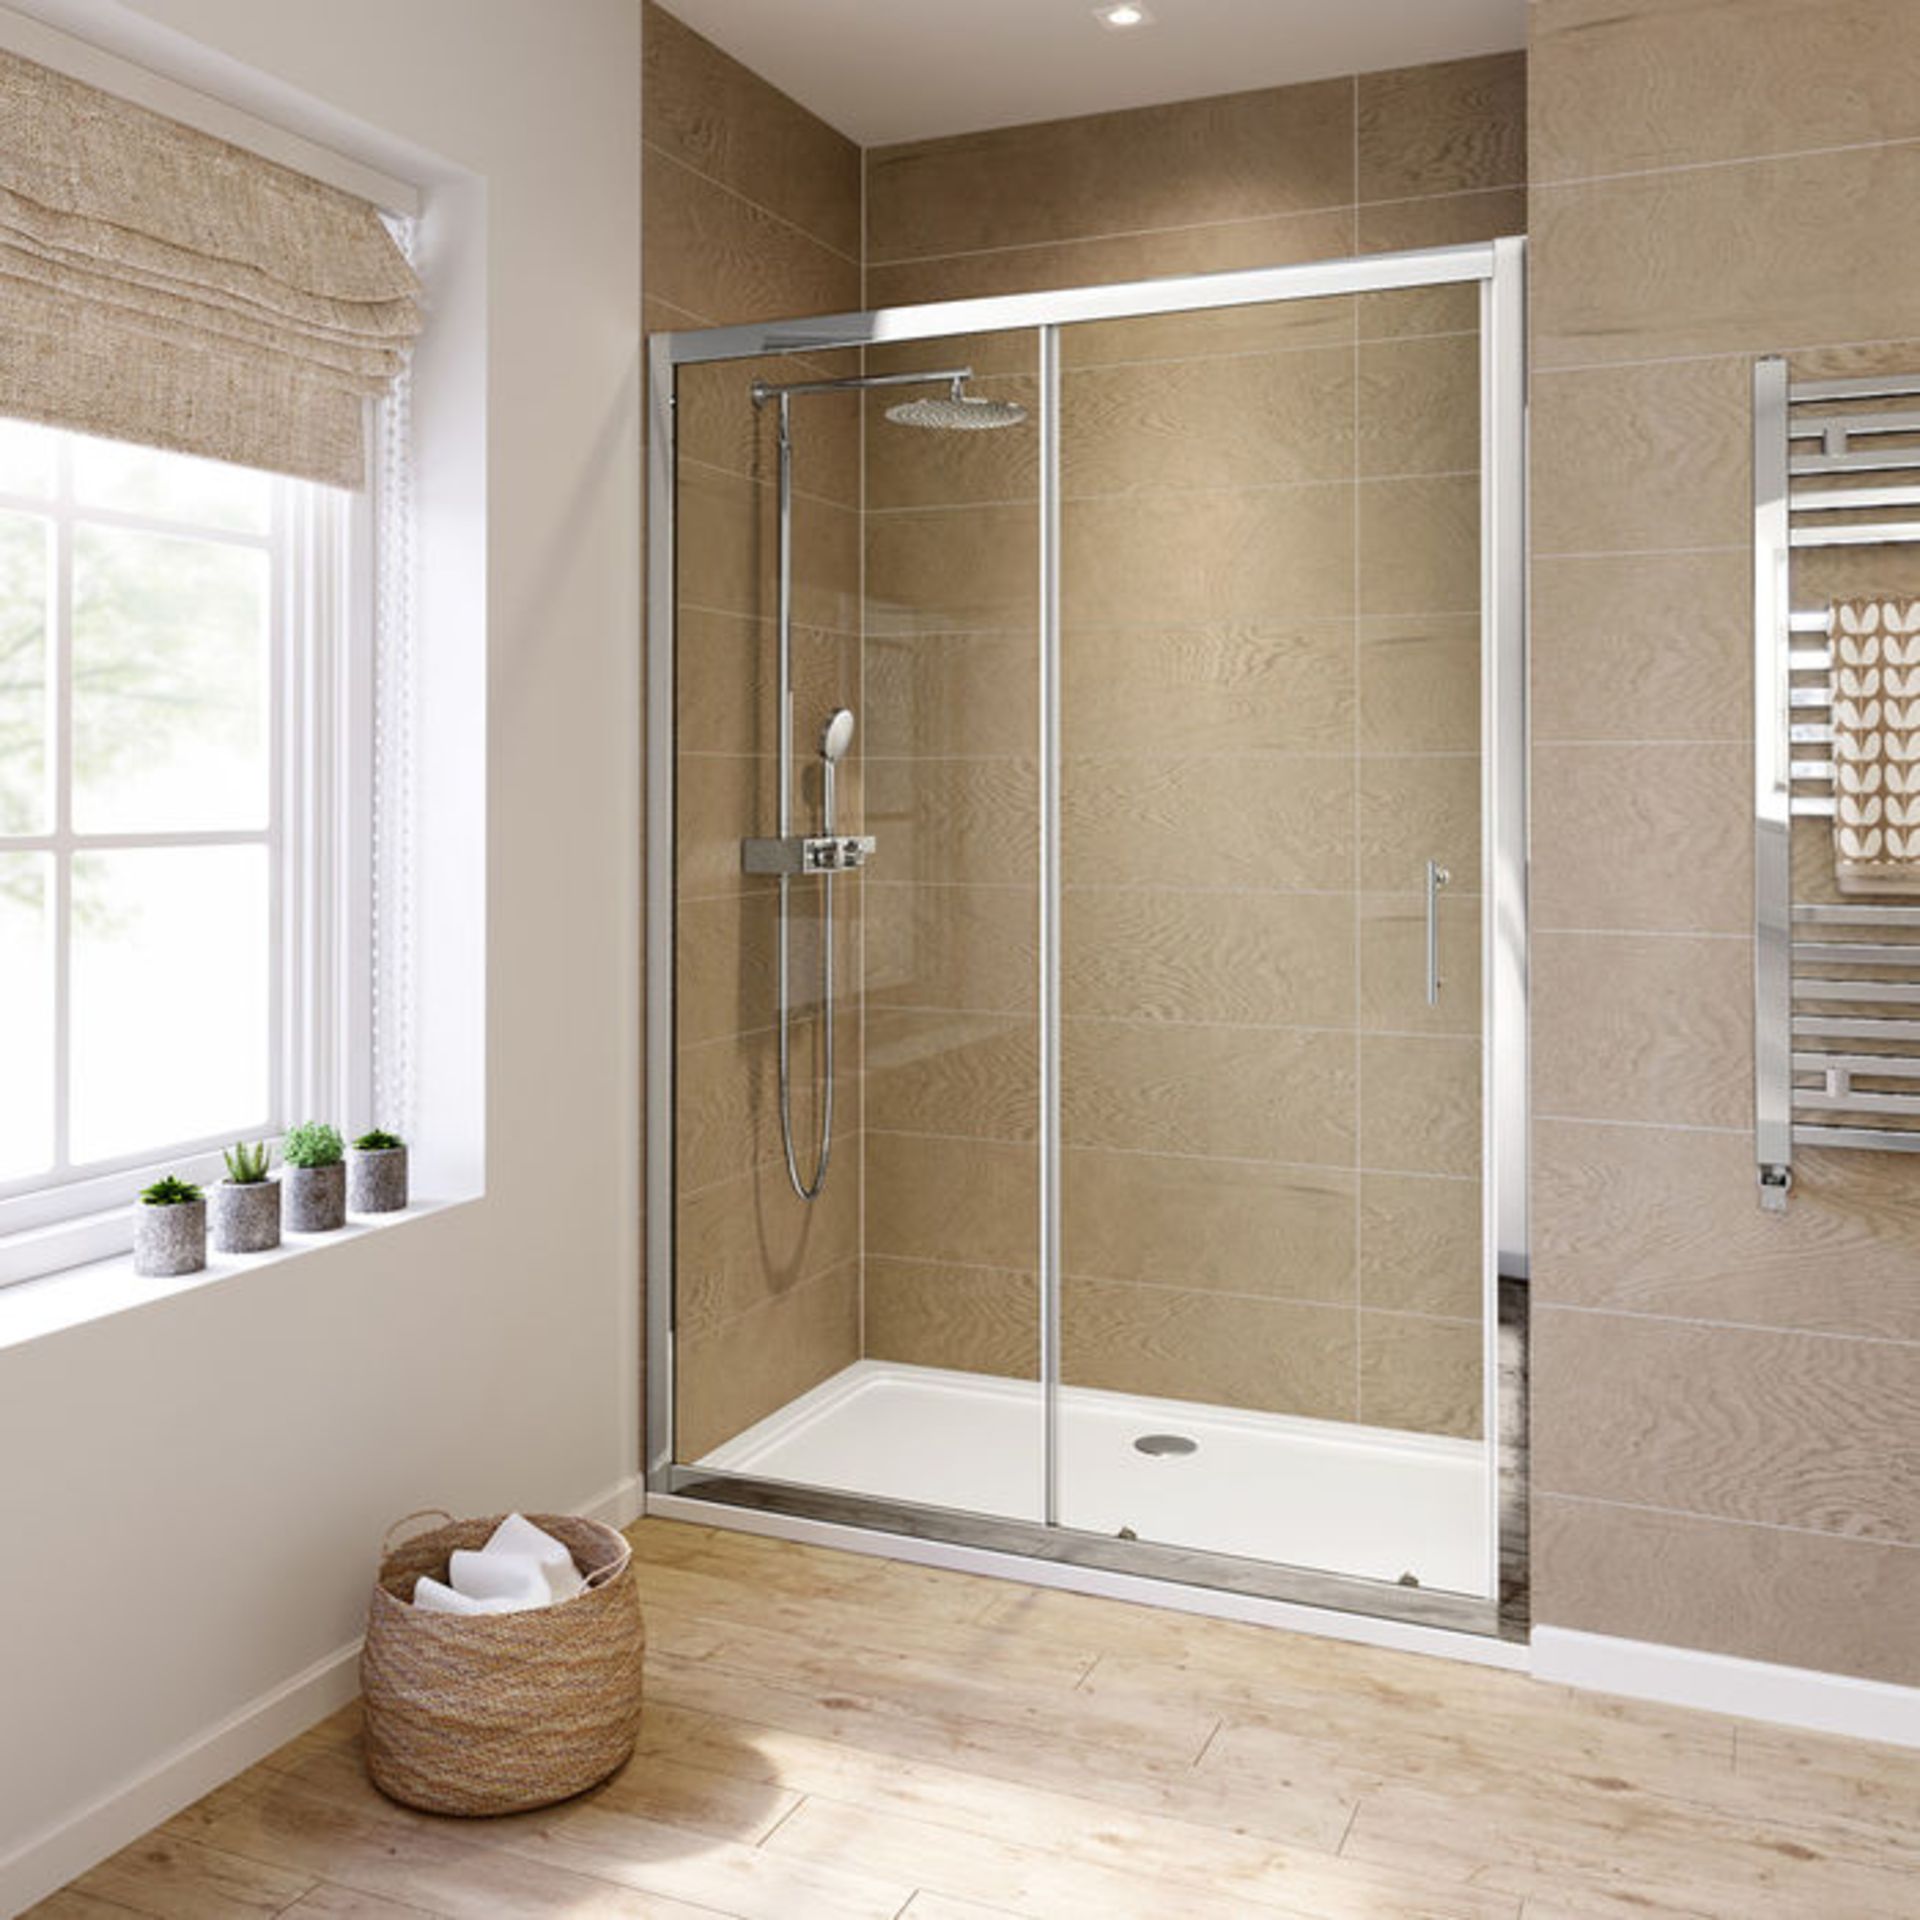 (XM153) 1400mm - 6mm - Elements Sliding Shower Door. RRP £299.99. 6mm Safety Glass Fully - Image 2 of 4